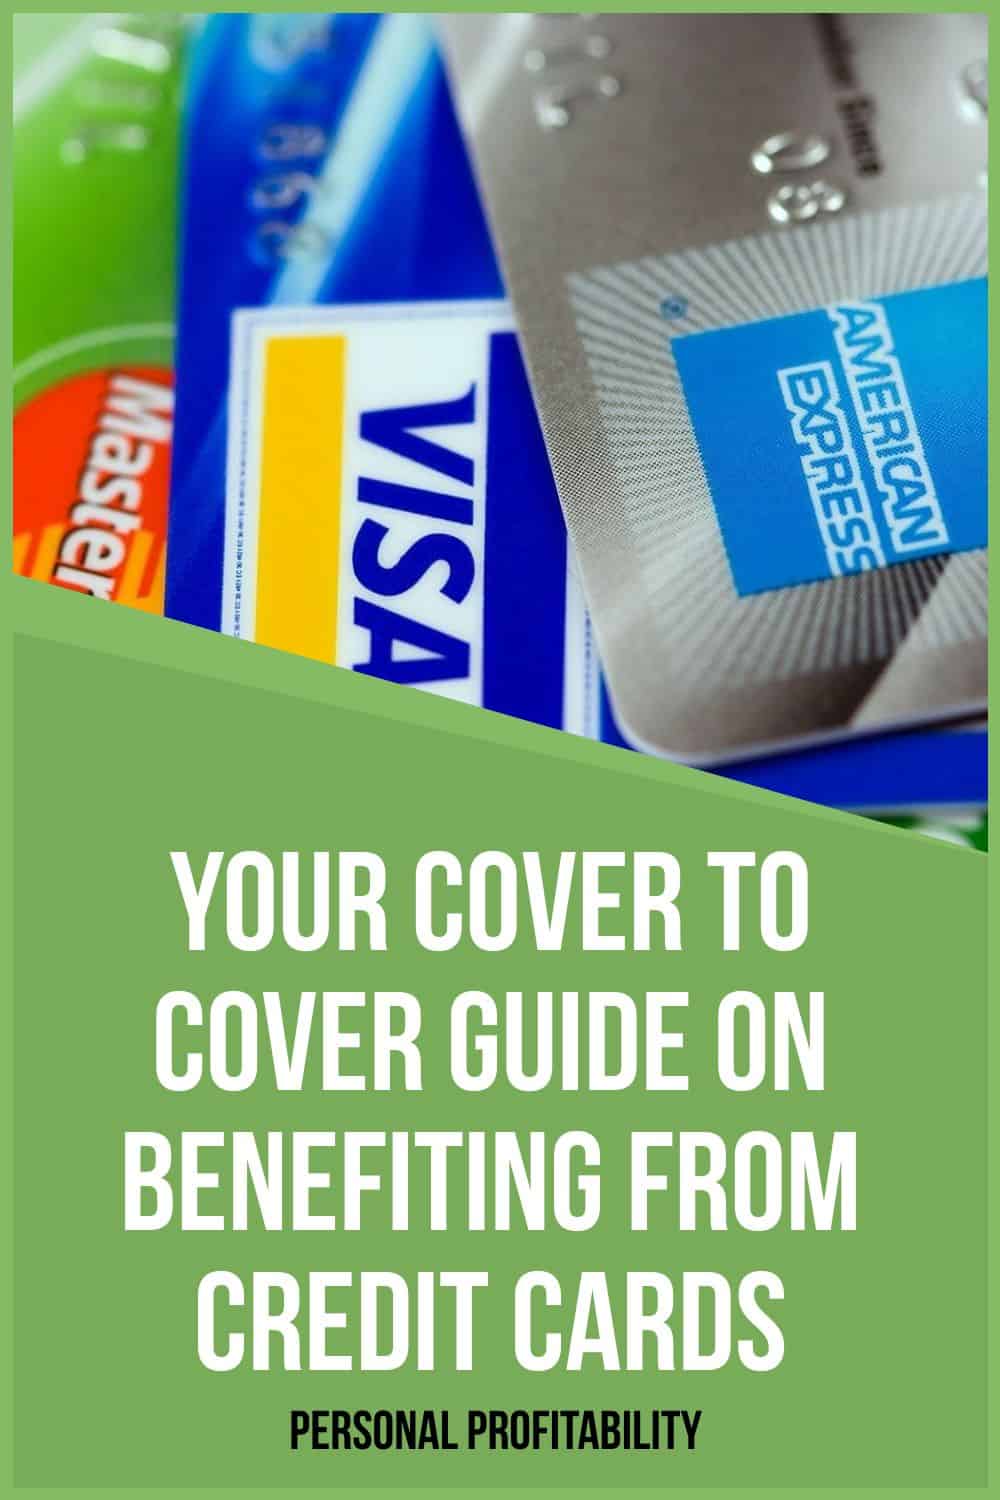 Your Cover to Cover Guide on Benefiting from Credit Cards